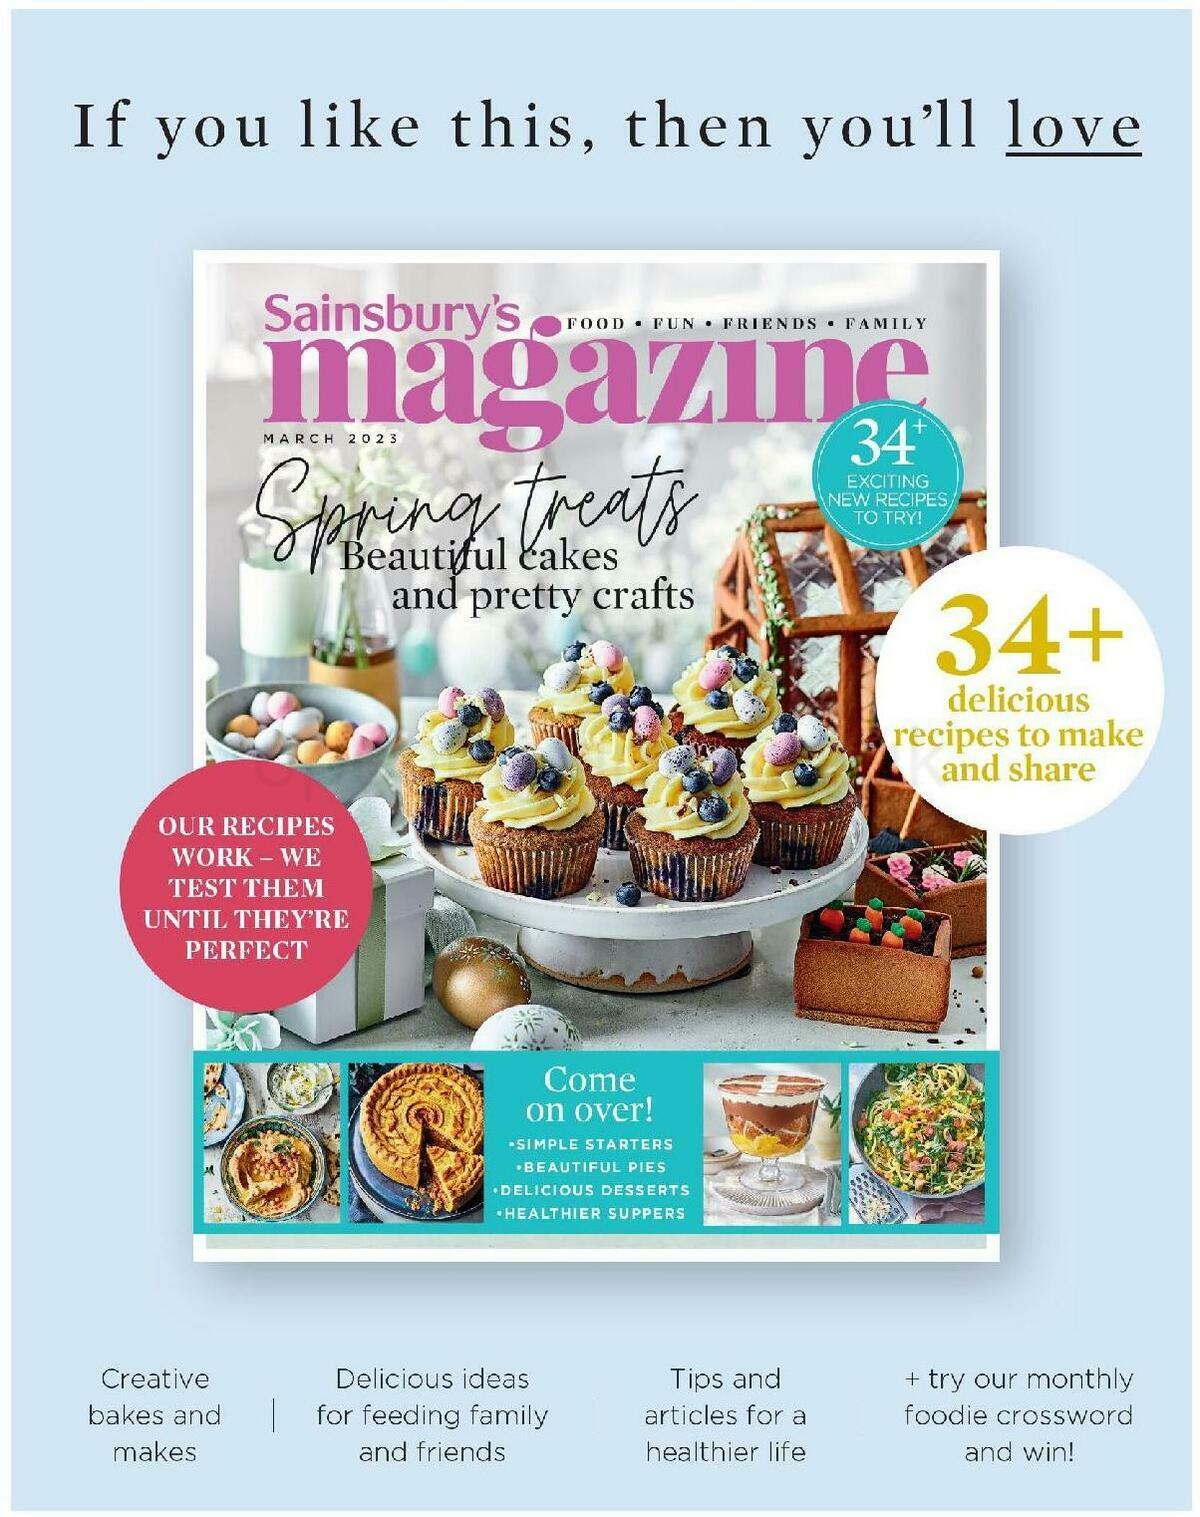 Sainsbury's Magazine Collection – Let's bake Offers from 25 March